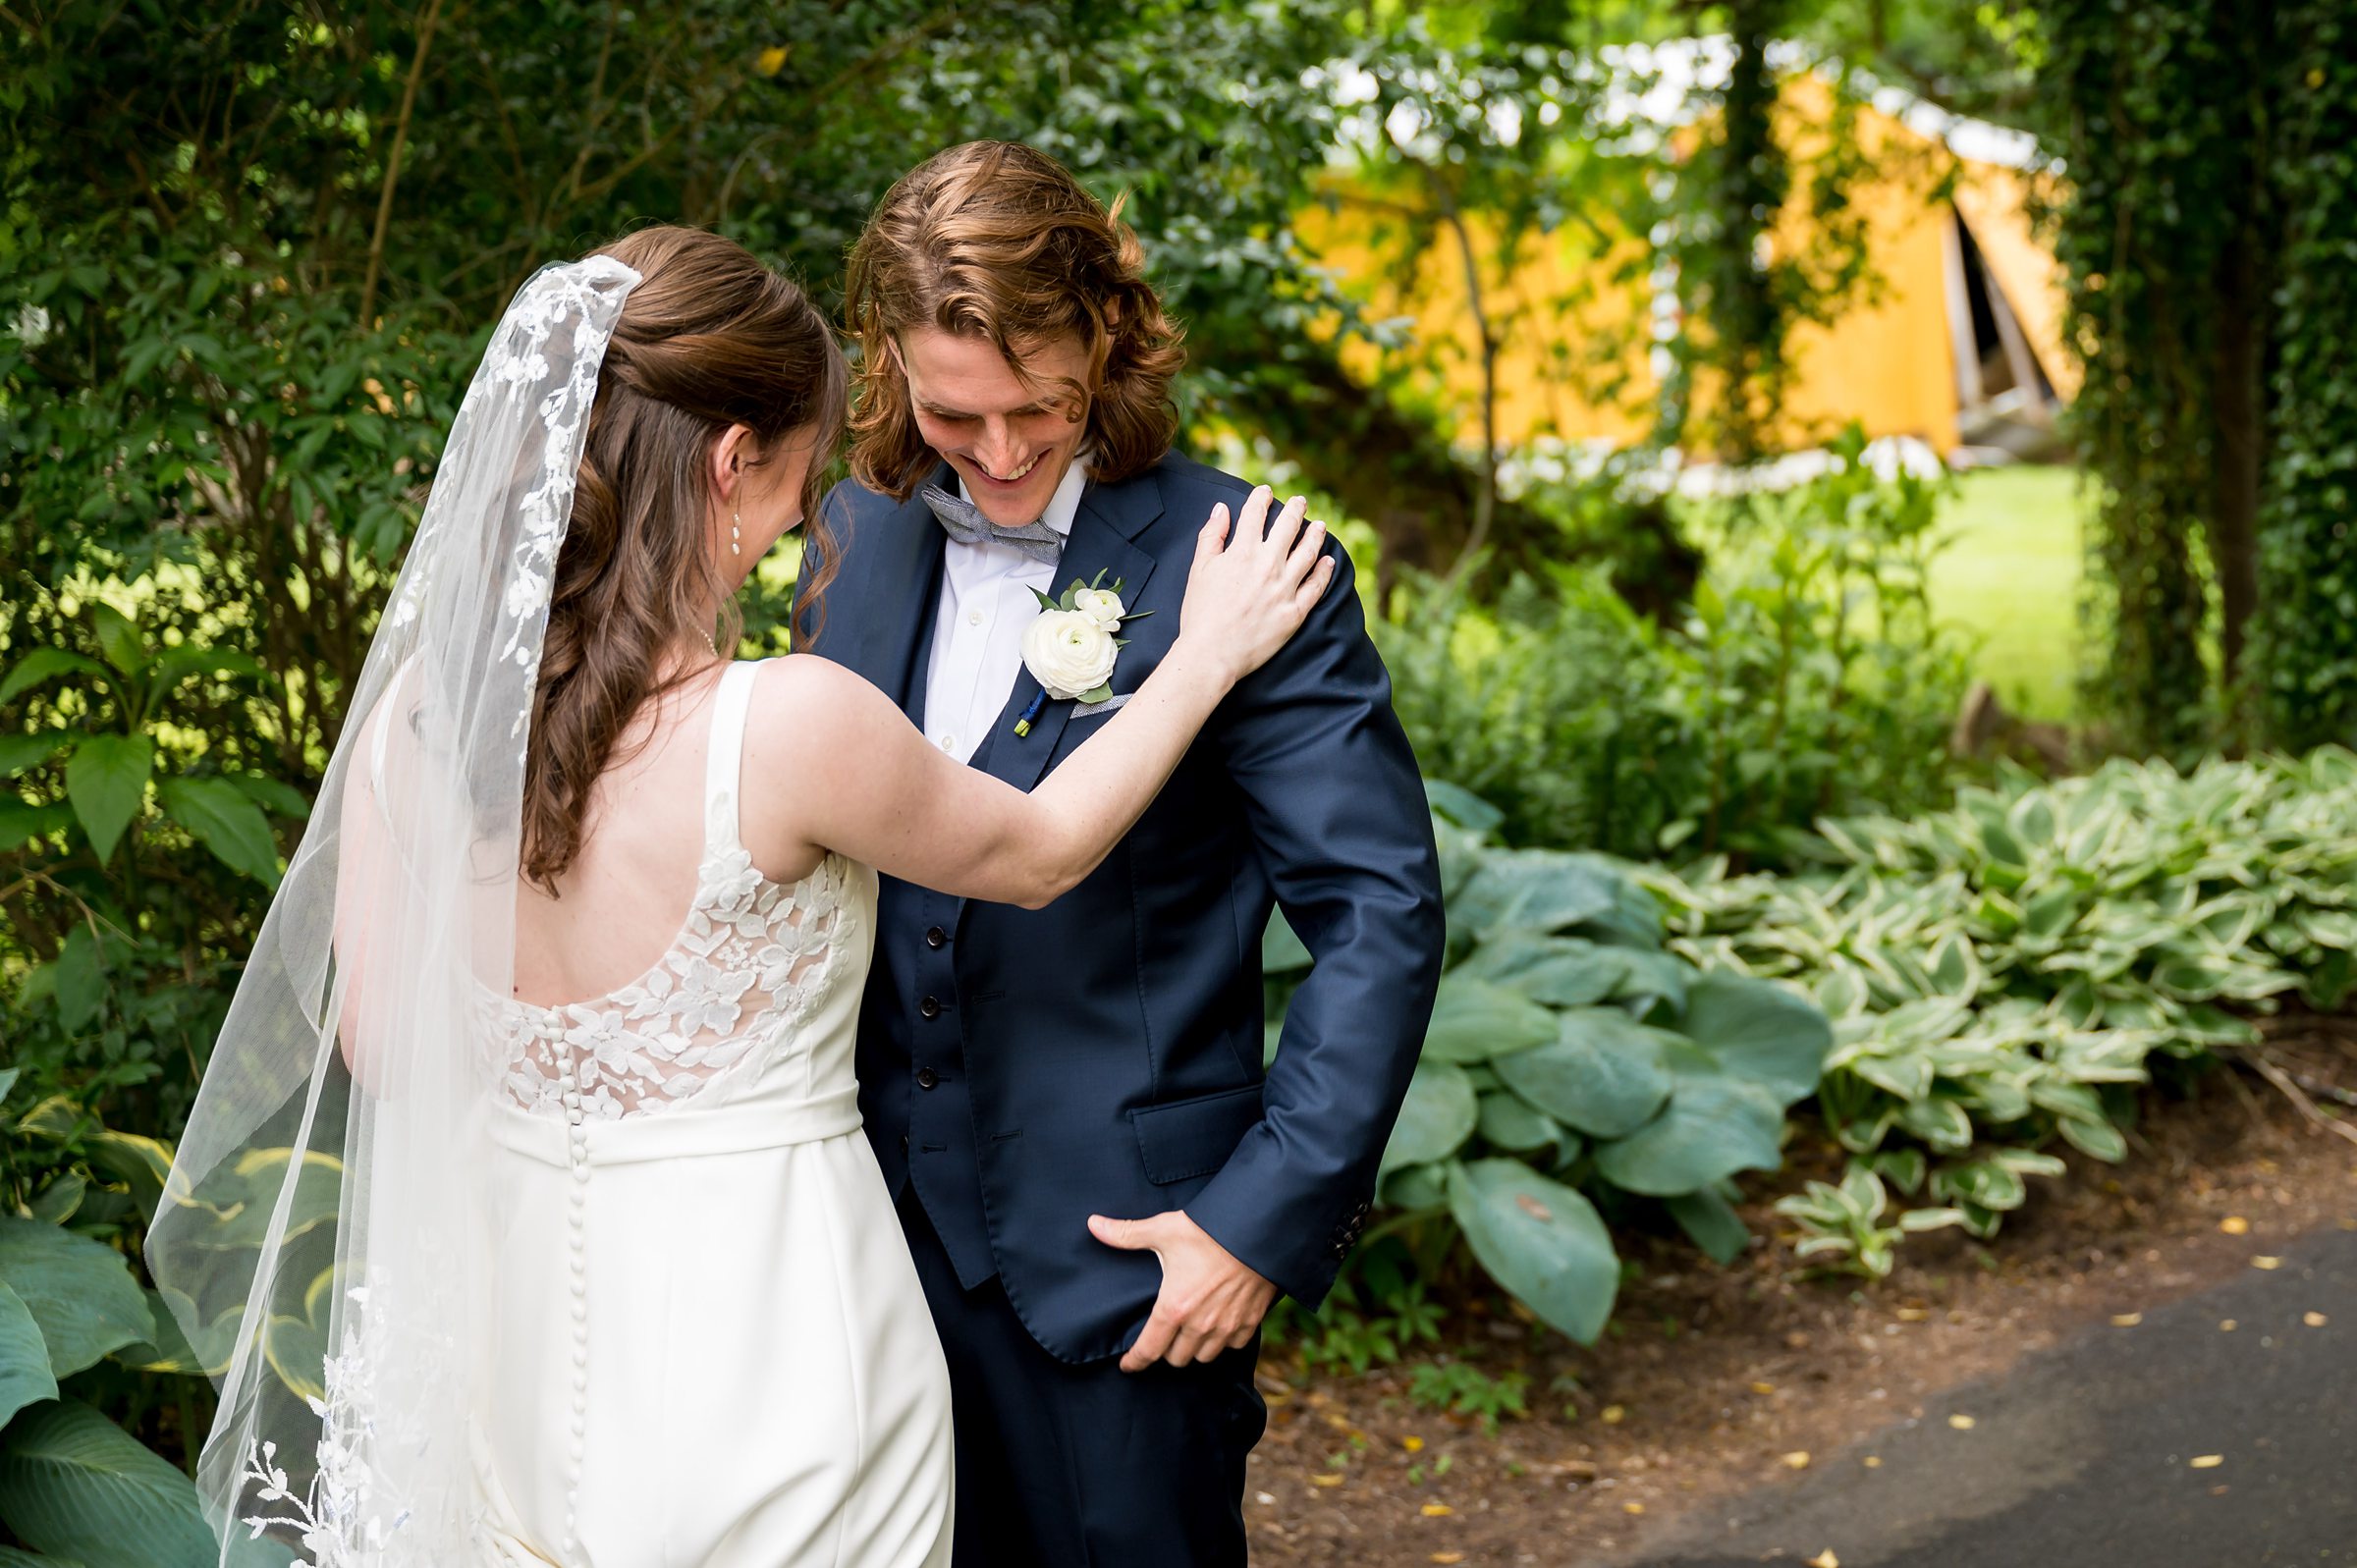 A bride and groom share a moment outdoors. The bride, in a white gown and veil, holds the groom's shoulders. The groom wears a dark suit and boutonniere, smiling and looking down. Lush greenery surrounds them.